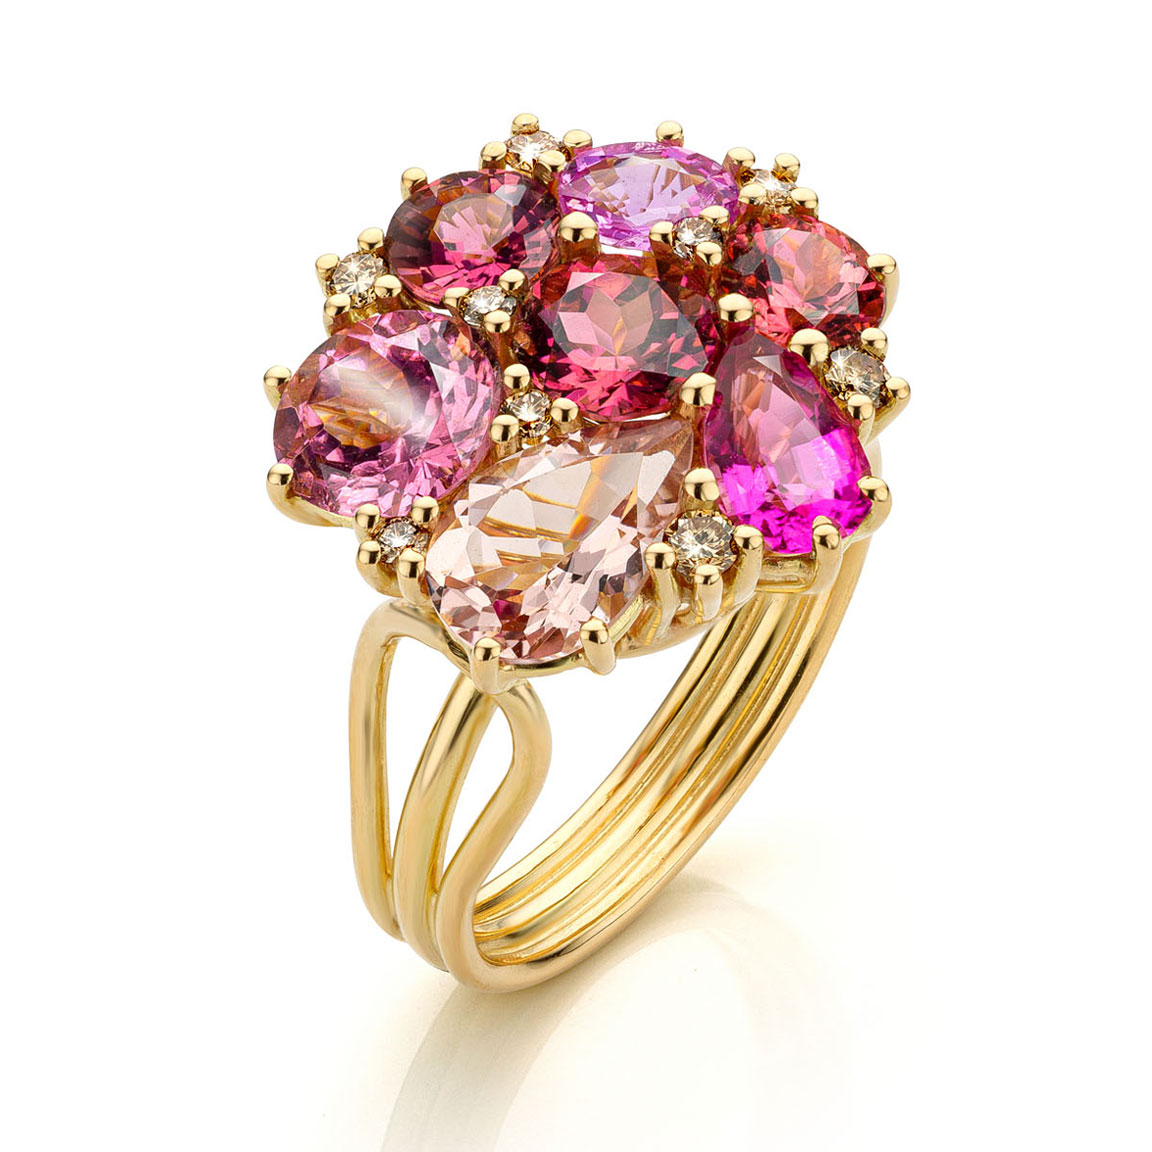 18 karat yellow gold ring with five pink tourmalines, one pink sapphire and one pink morganite and small brown diamonds.